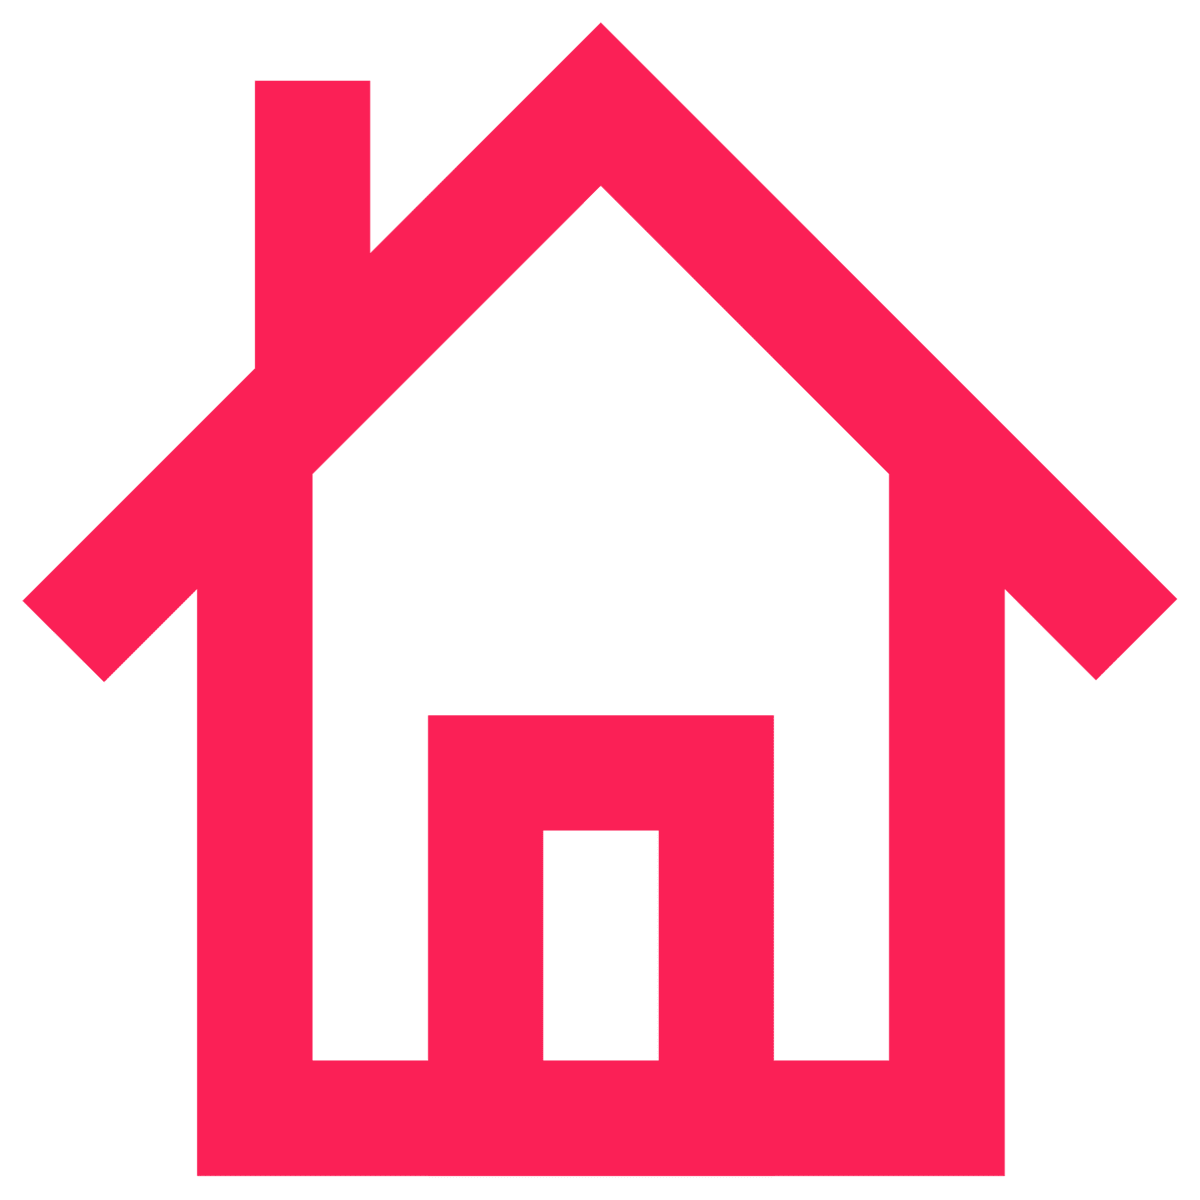 Remote Office World Logo depecticts a simple drawing of a house with a red outline on a checkered backdrop